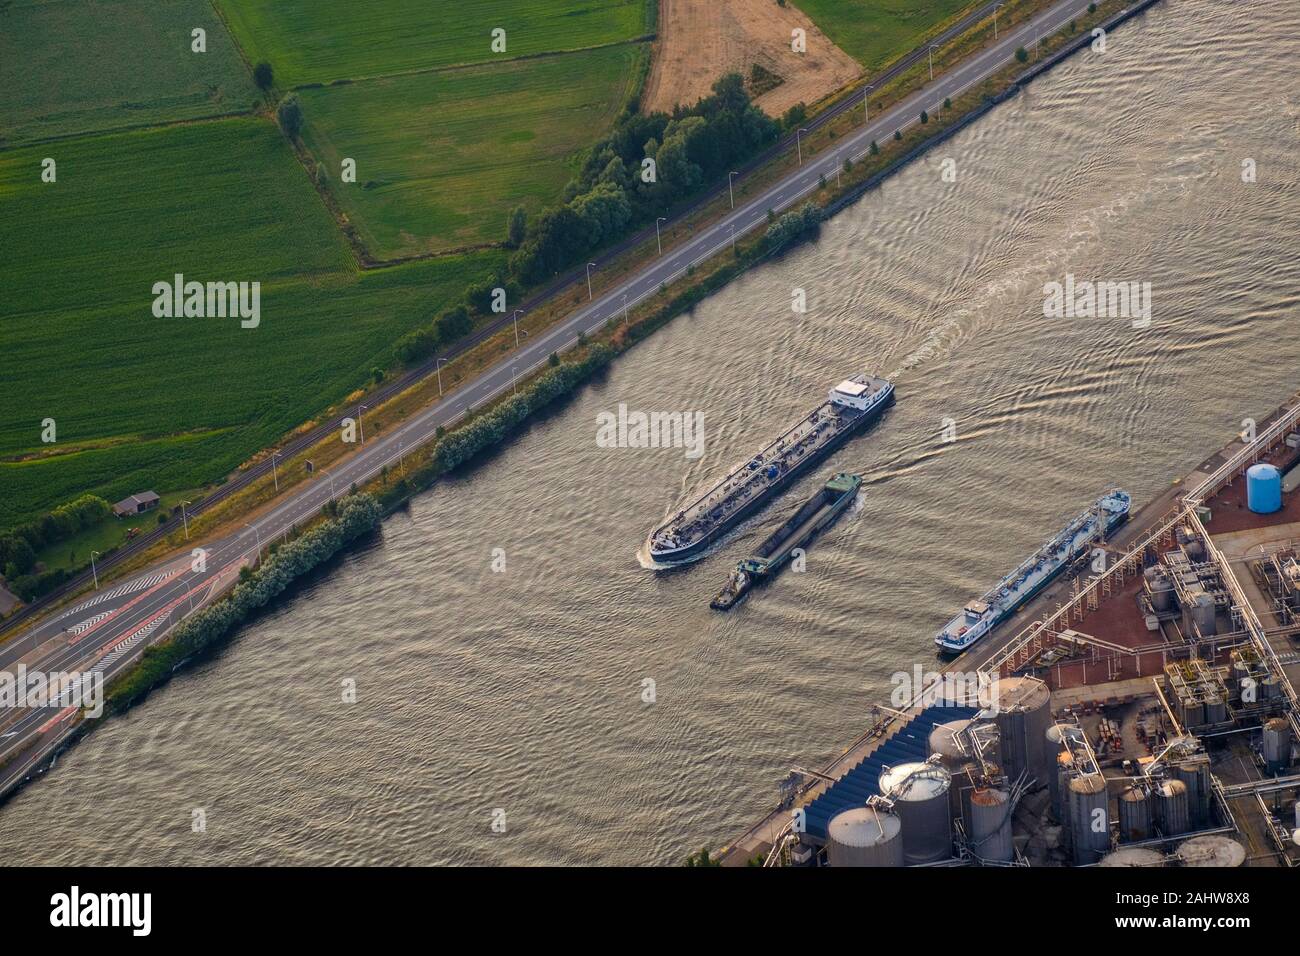 Two boats cross each other at the important Ghent-Terneuzen canal. At the right lies a fabric of industrial chemicals, one of the area's industries. Stock Photo